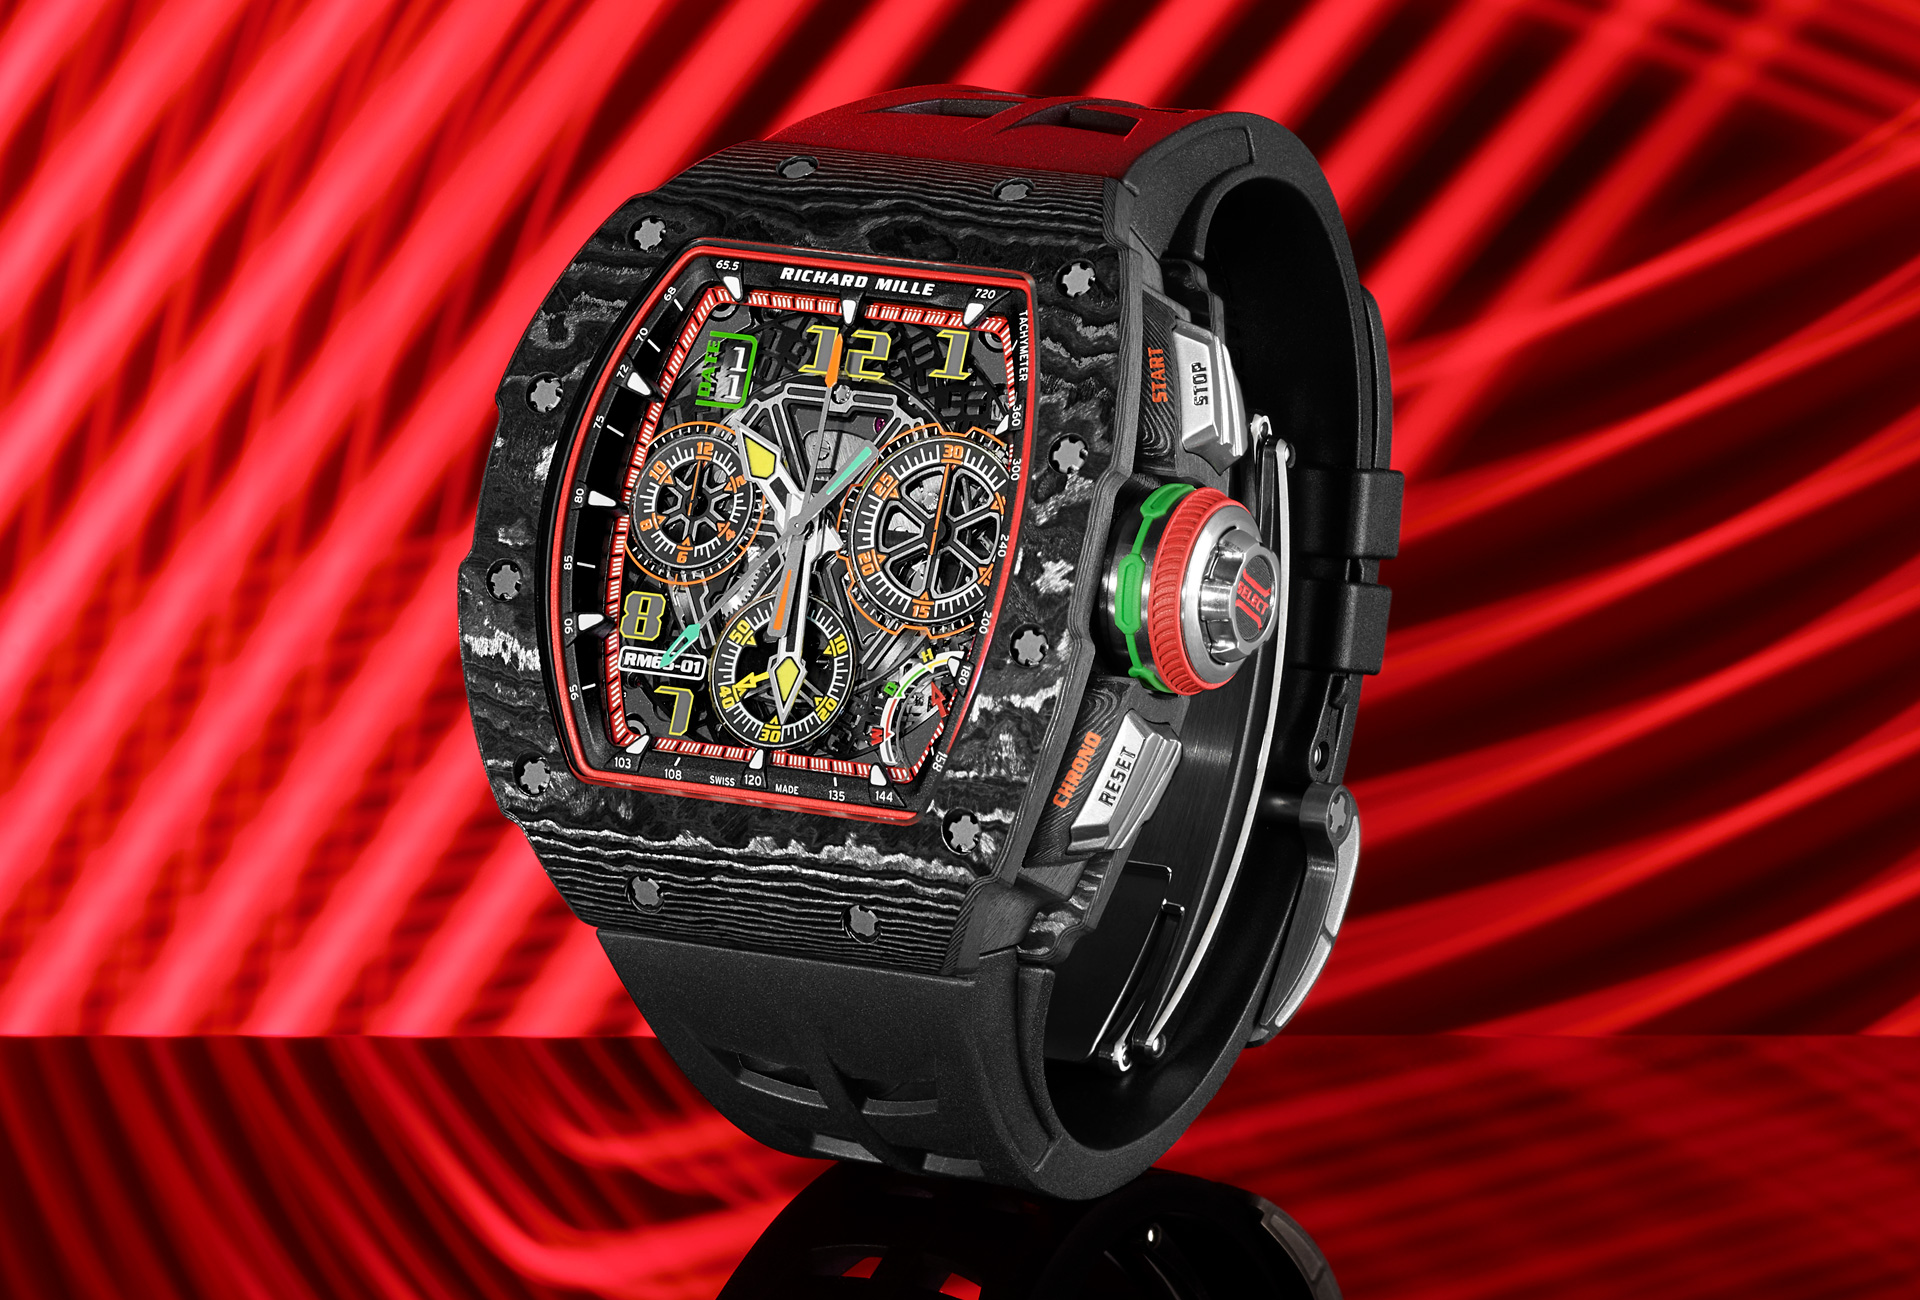 Technique And Innovation At The Heart Of The New Richard Mille Chronograph Fhh Journal